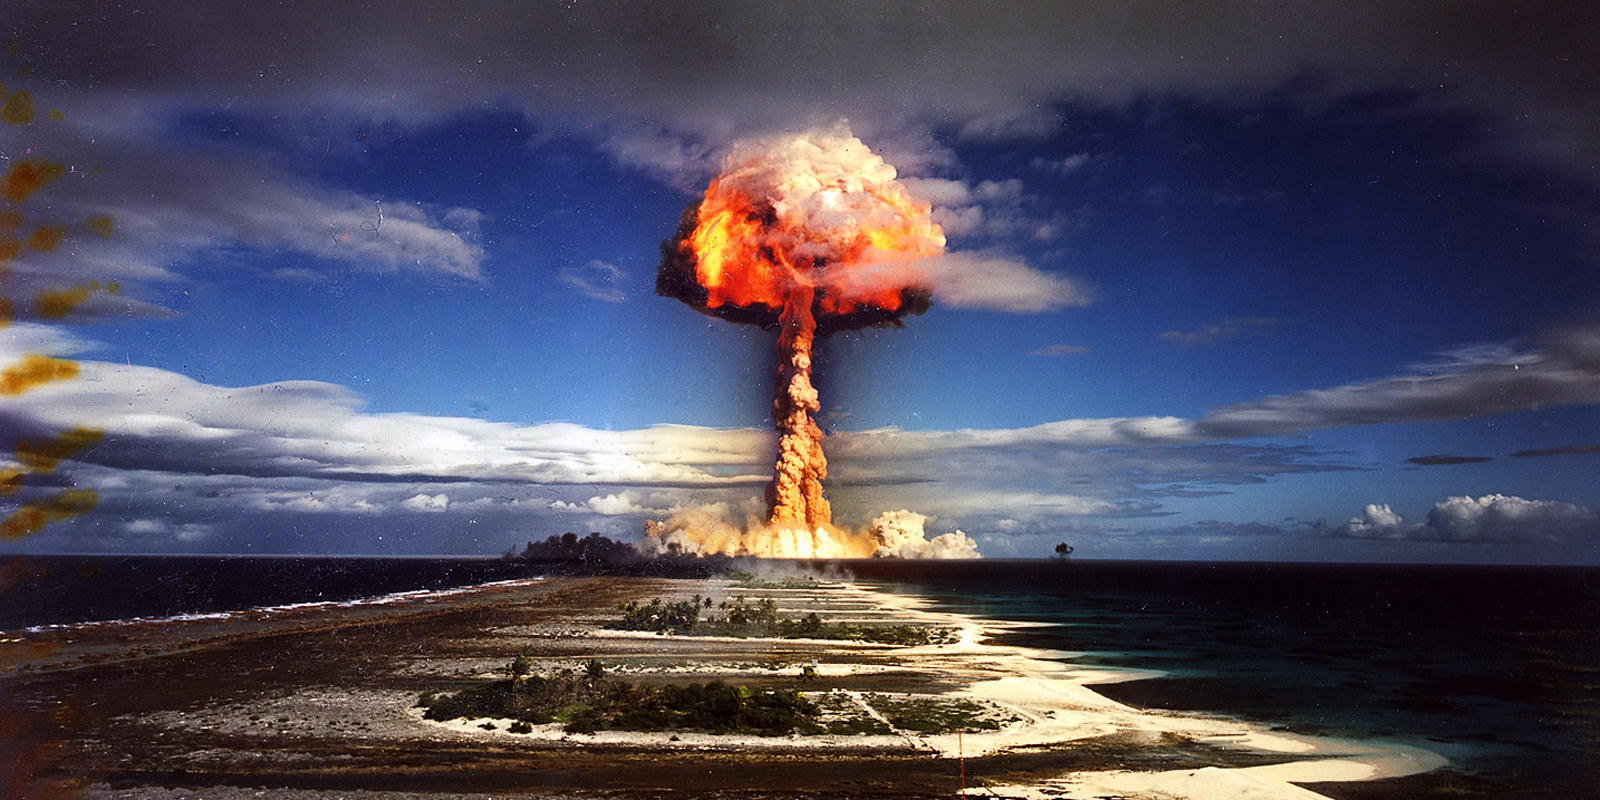 French government's test of the Licorne thermonuclear weapon, Mururoa atoll, French Polynesia, 1970, via Flickr userPierre J.